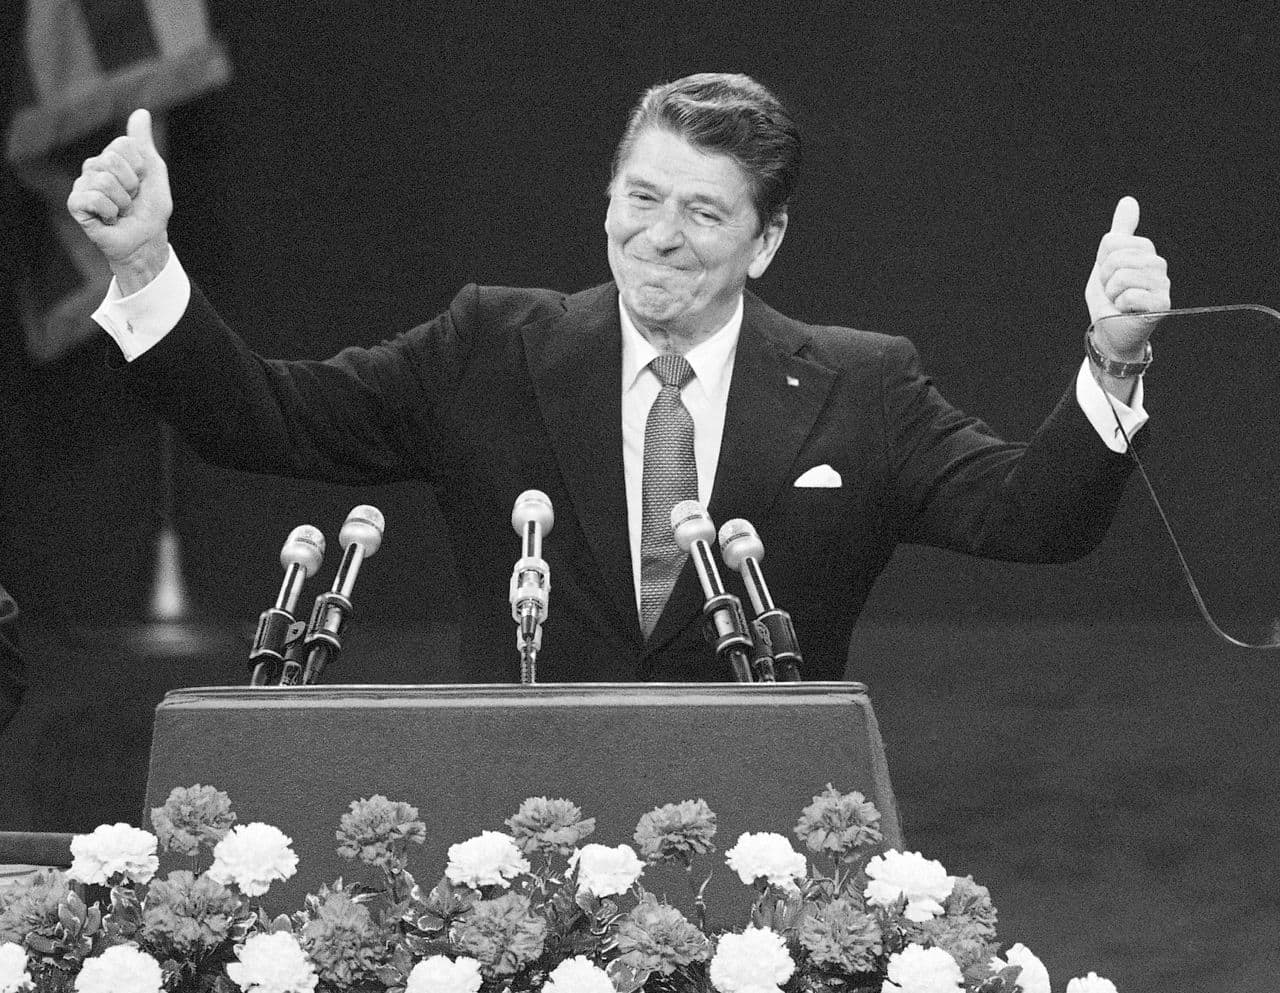 Rich Barlow: "Ronald Reagan entered the White House with unimpeachable anti-communist credentials... Yet when he sensed a different leader in Mikhail Gorbachev, the Gipper set the diplomatic microwave on thaw, notably agreeing to the 1987 INF Treaty." Pictured: Ronald Reagan, July 17, 1980. (Rusty Kennedy/AP)